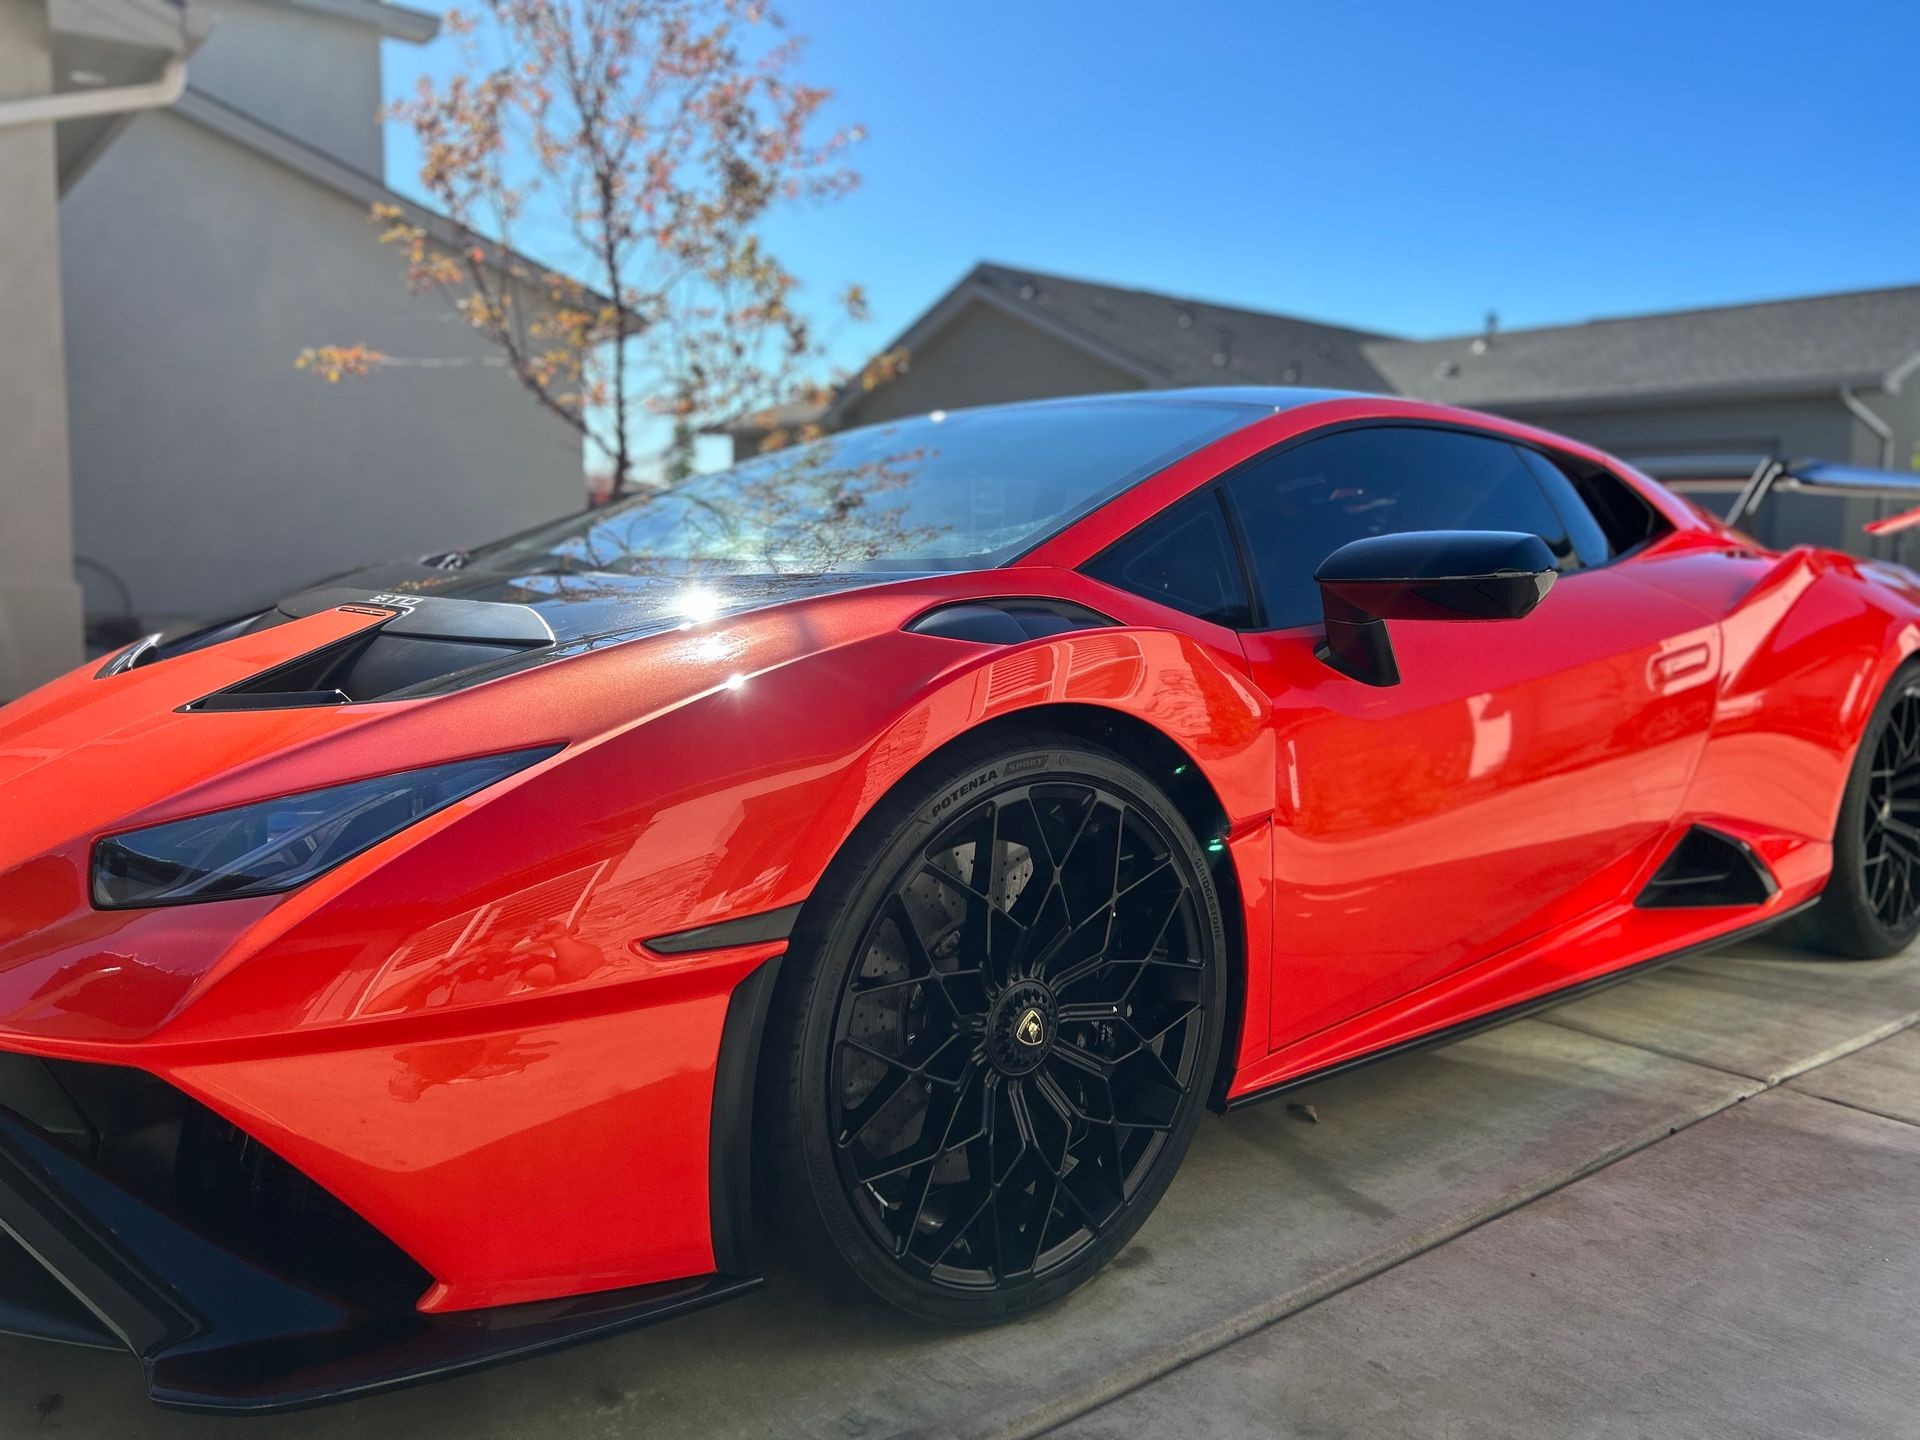 Red Lamborghini Parked in Driveway after being detailed by Eagle Star Detail